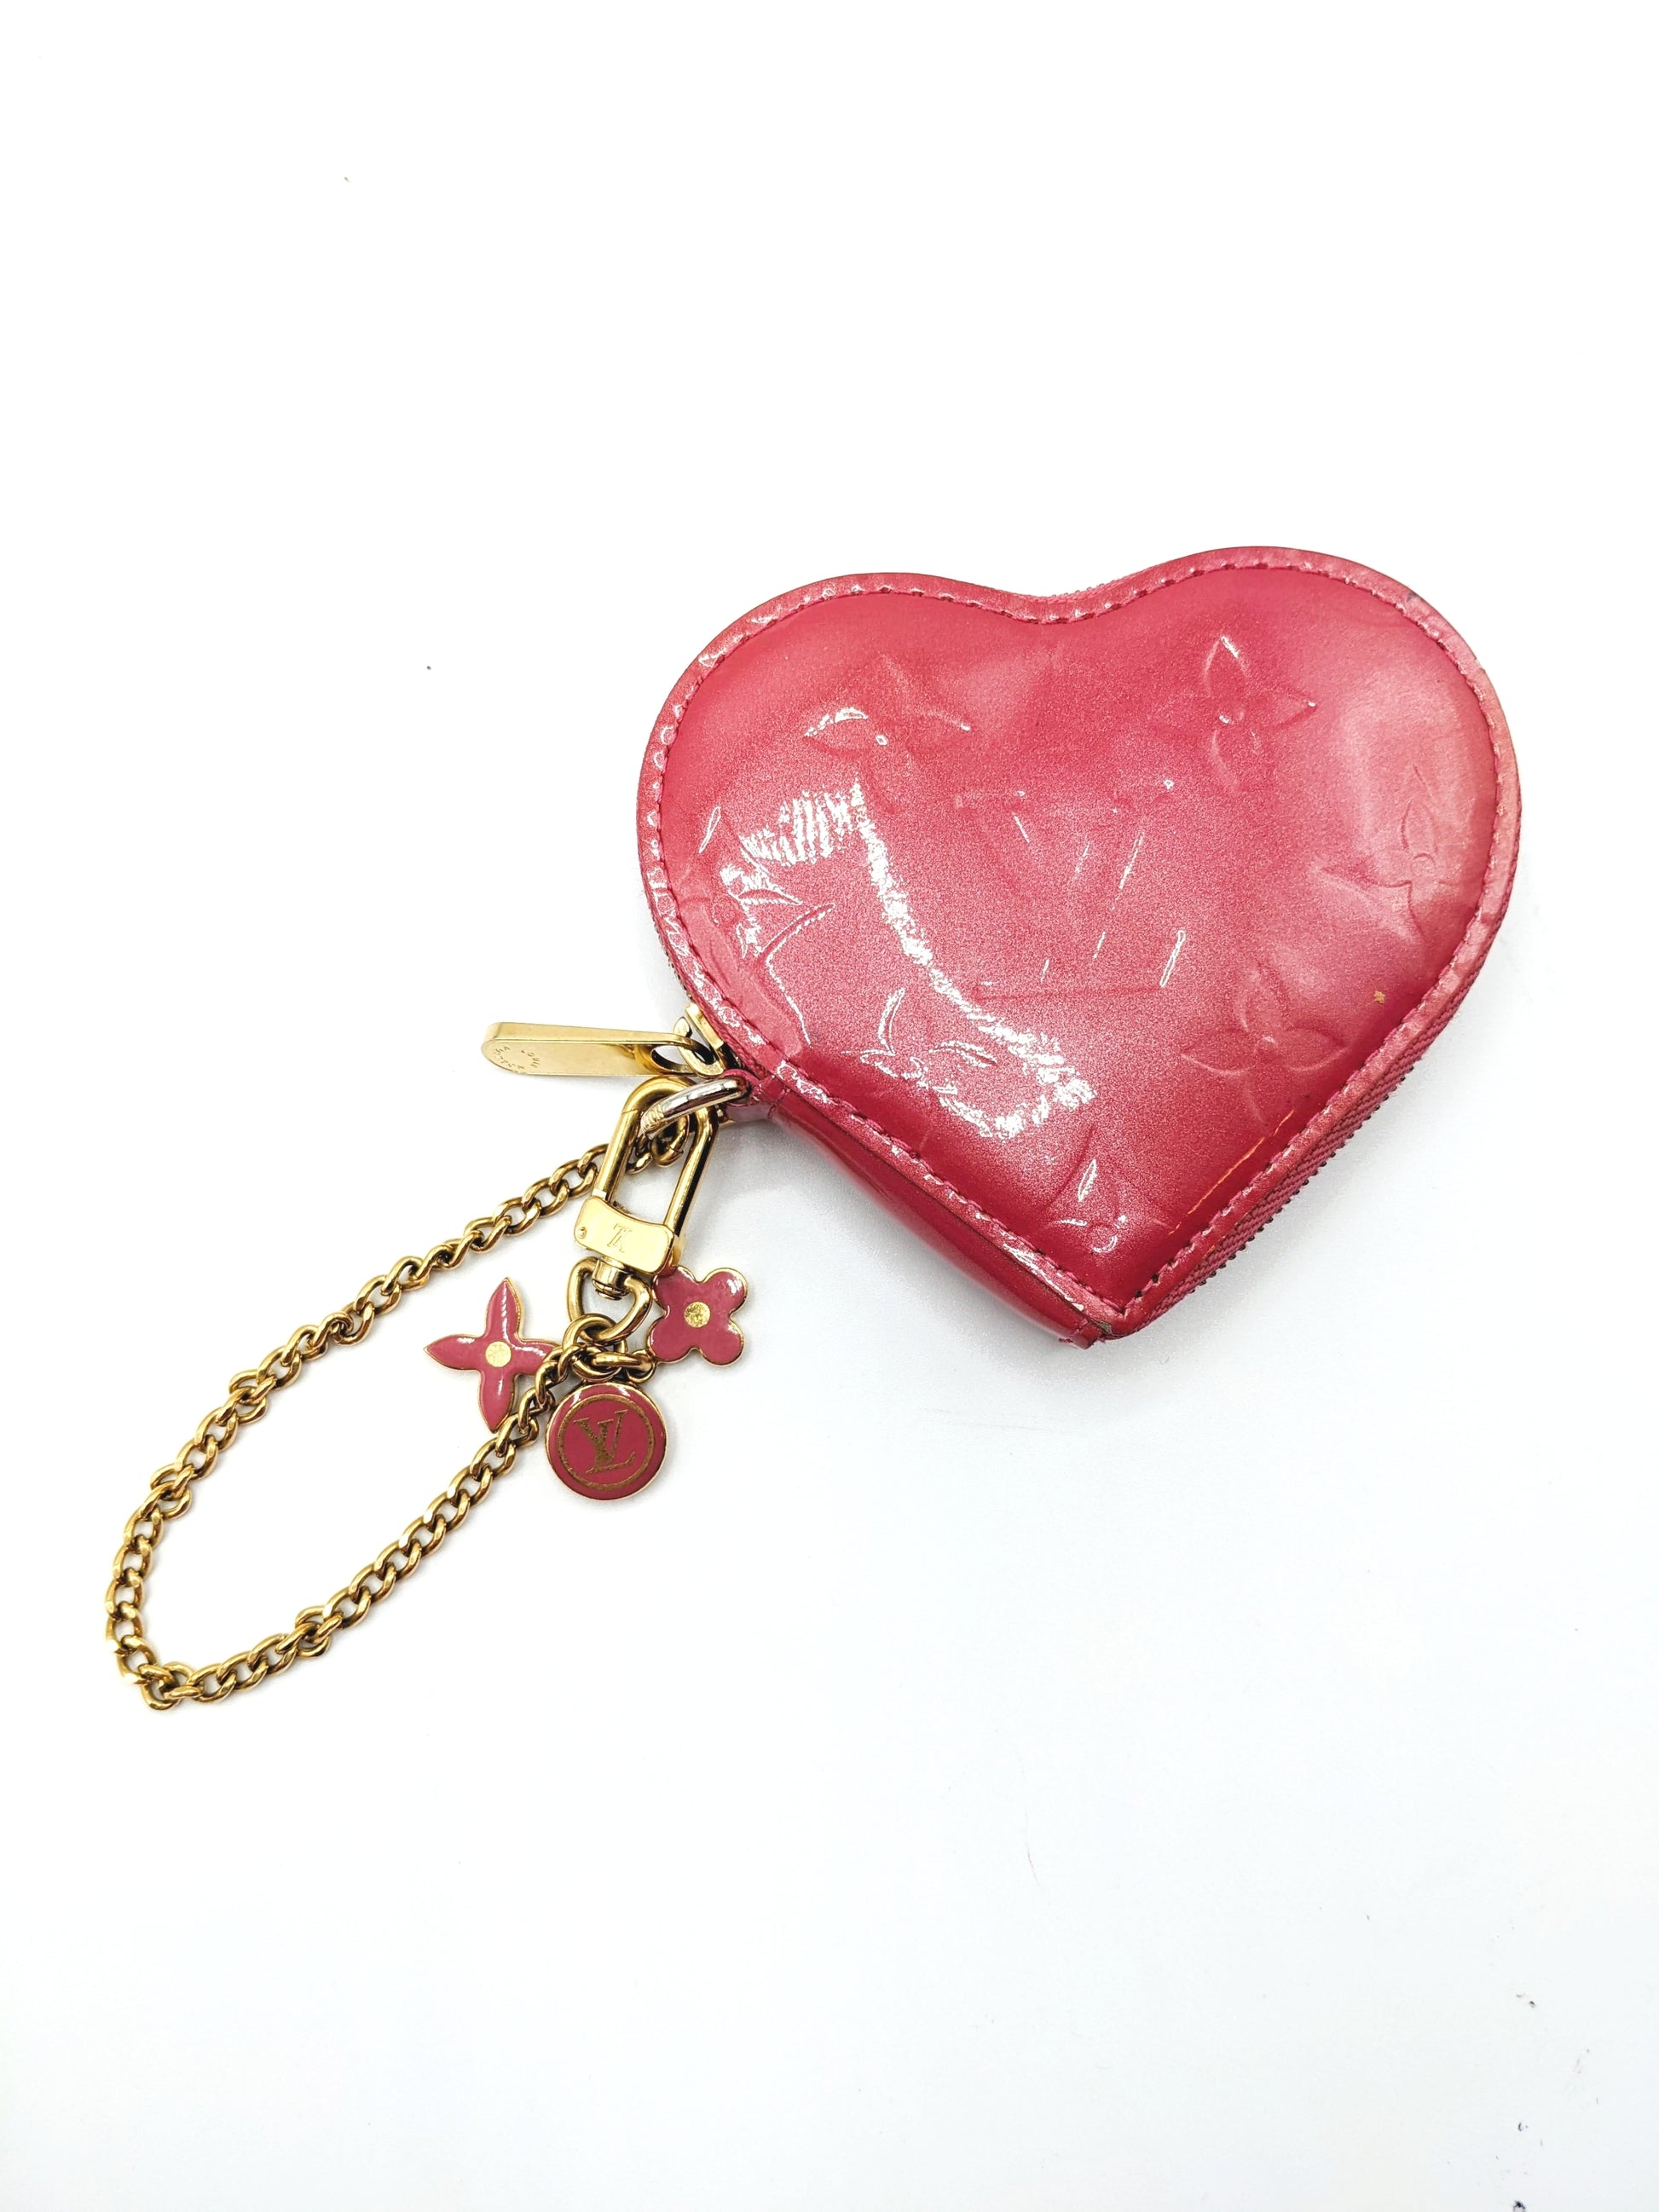 Louis Vuitton Vernis Monogram Heart Coin Pouch – For The Love of